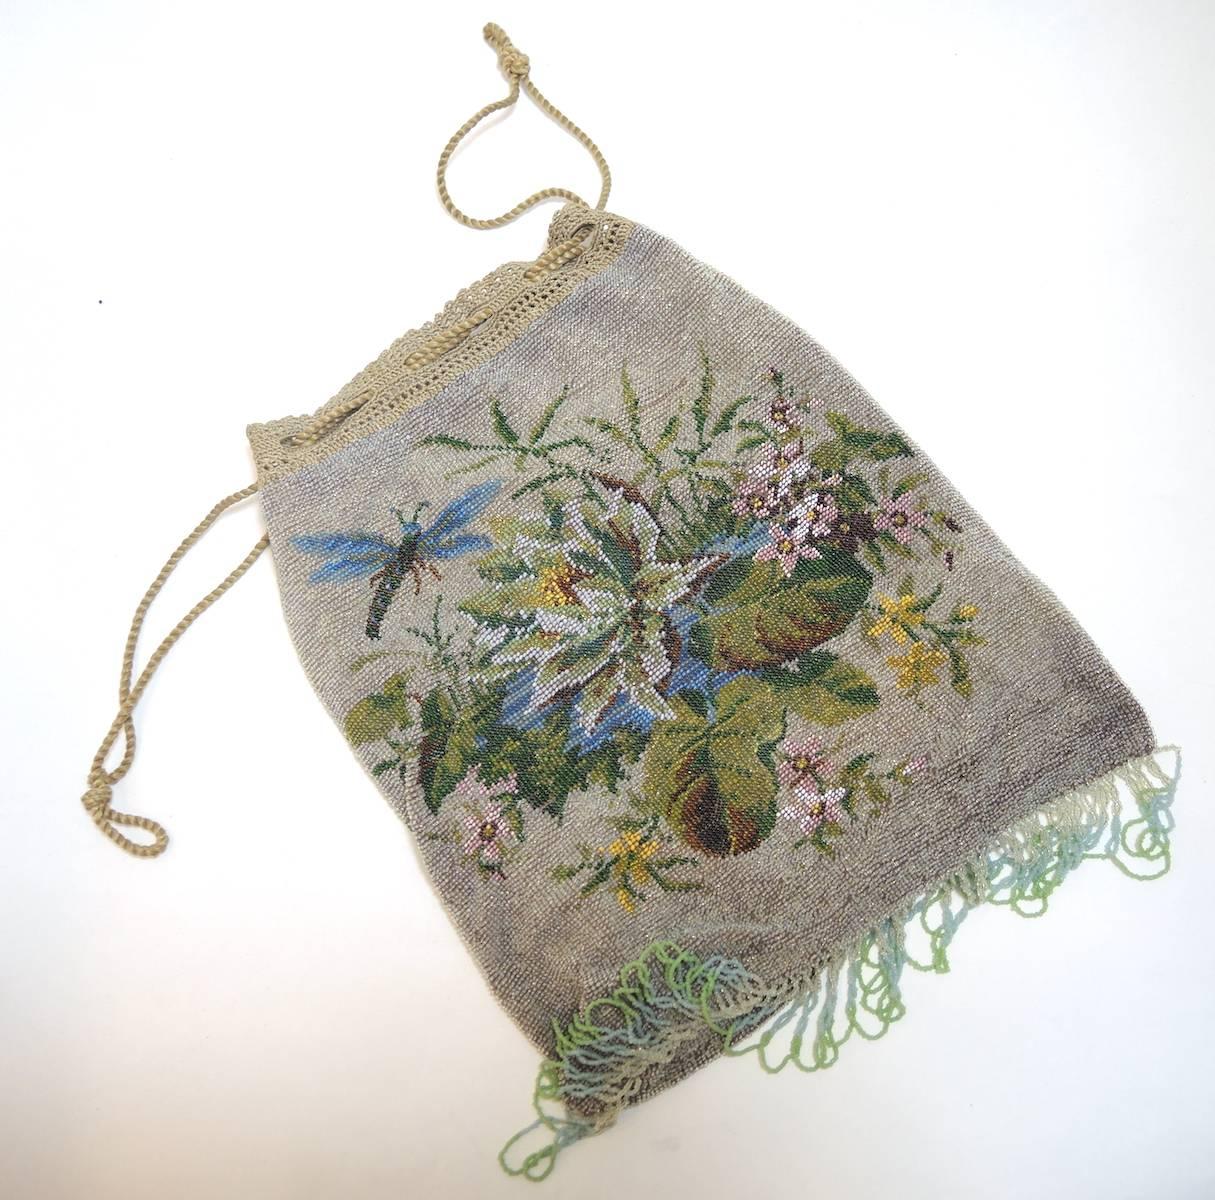 This is a lovely steel beaded purse with a botanical floral motif on a dove gray beaded background.  It has a beige croche finish to the drawstring, making it different from other purses  It measures 9” x 10” has multicolor fringe adding another 2